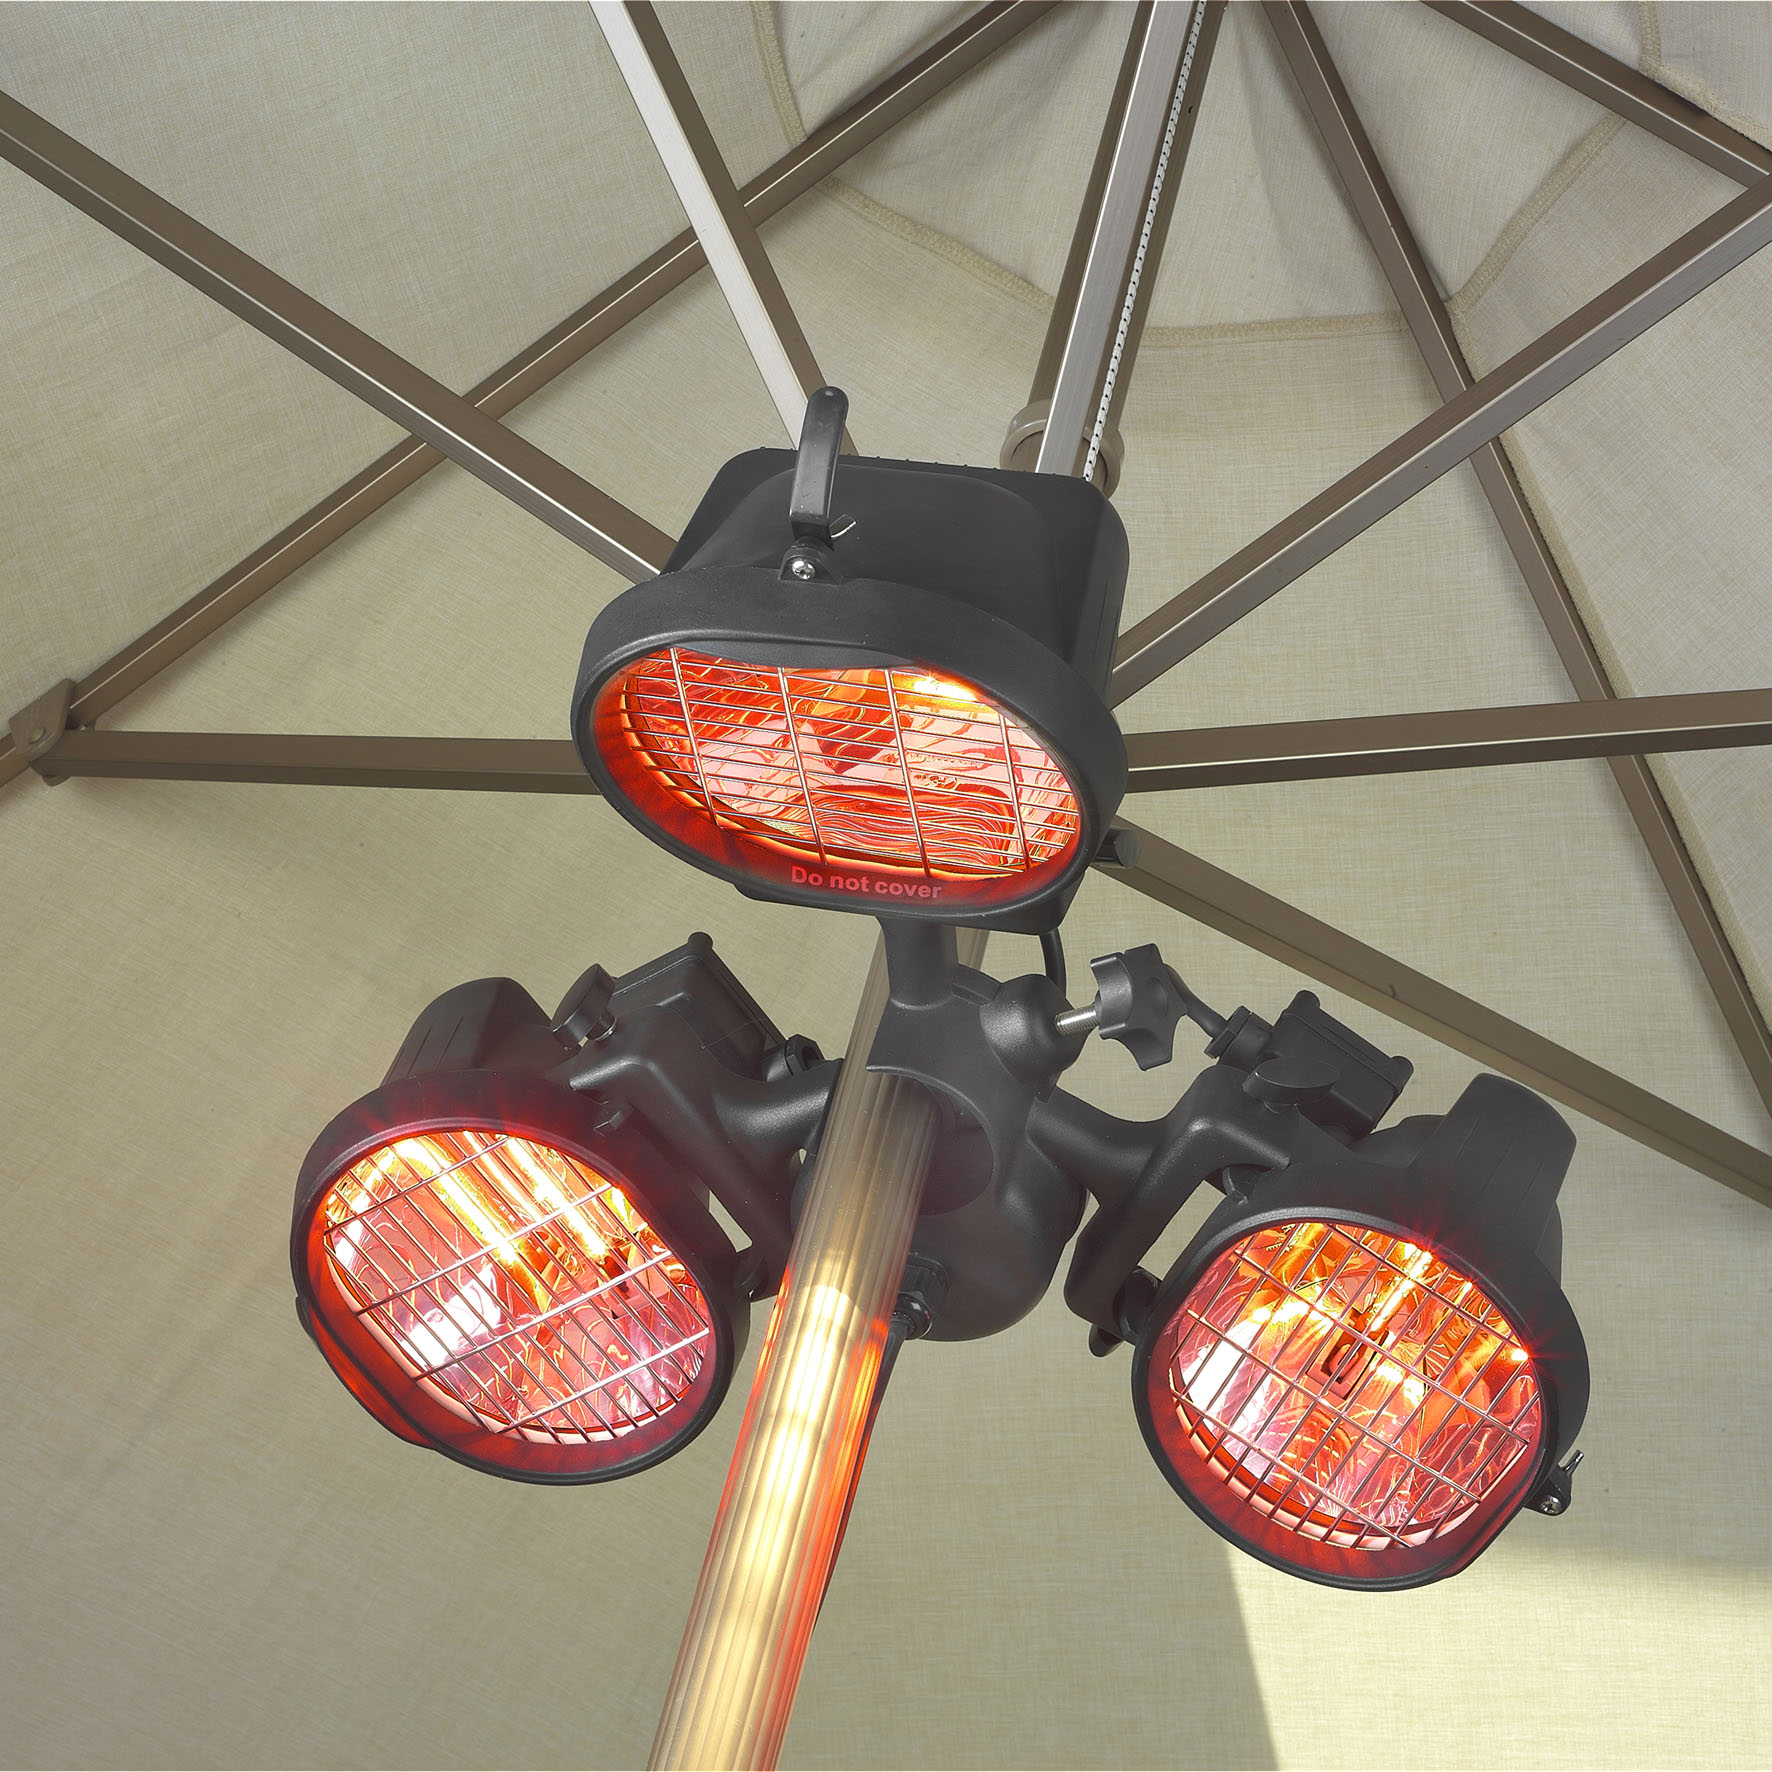 1.5kW Infra-red Domestic Parasol Heater.